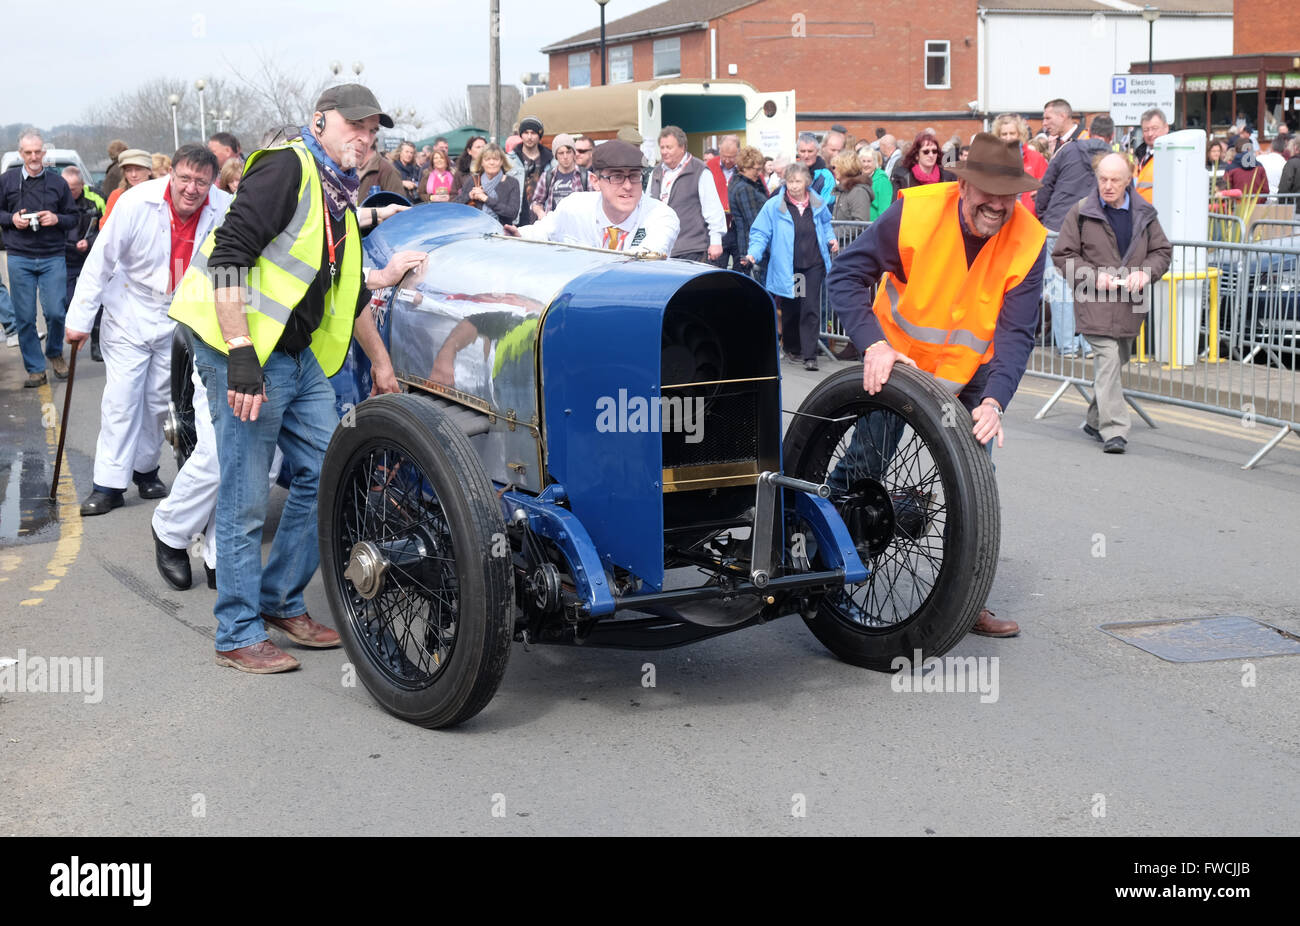 Bromyard, Herefordshire UK April, 2016 - the inaugural Speed Festival engineers and marshals push the legendary Bluebird once driven by Sir Malcom Campbell to the start line for a drive through the town - the car is a 1920 Sunbeam 350 HP. In 1925 Campbell broke the World Land Speed record in this vehicle for the third time with a speed of 150.75 mph. The Bluebird belongs to the National Motor Museum at Beaulieu. Stock Photo